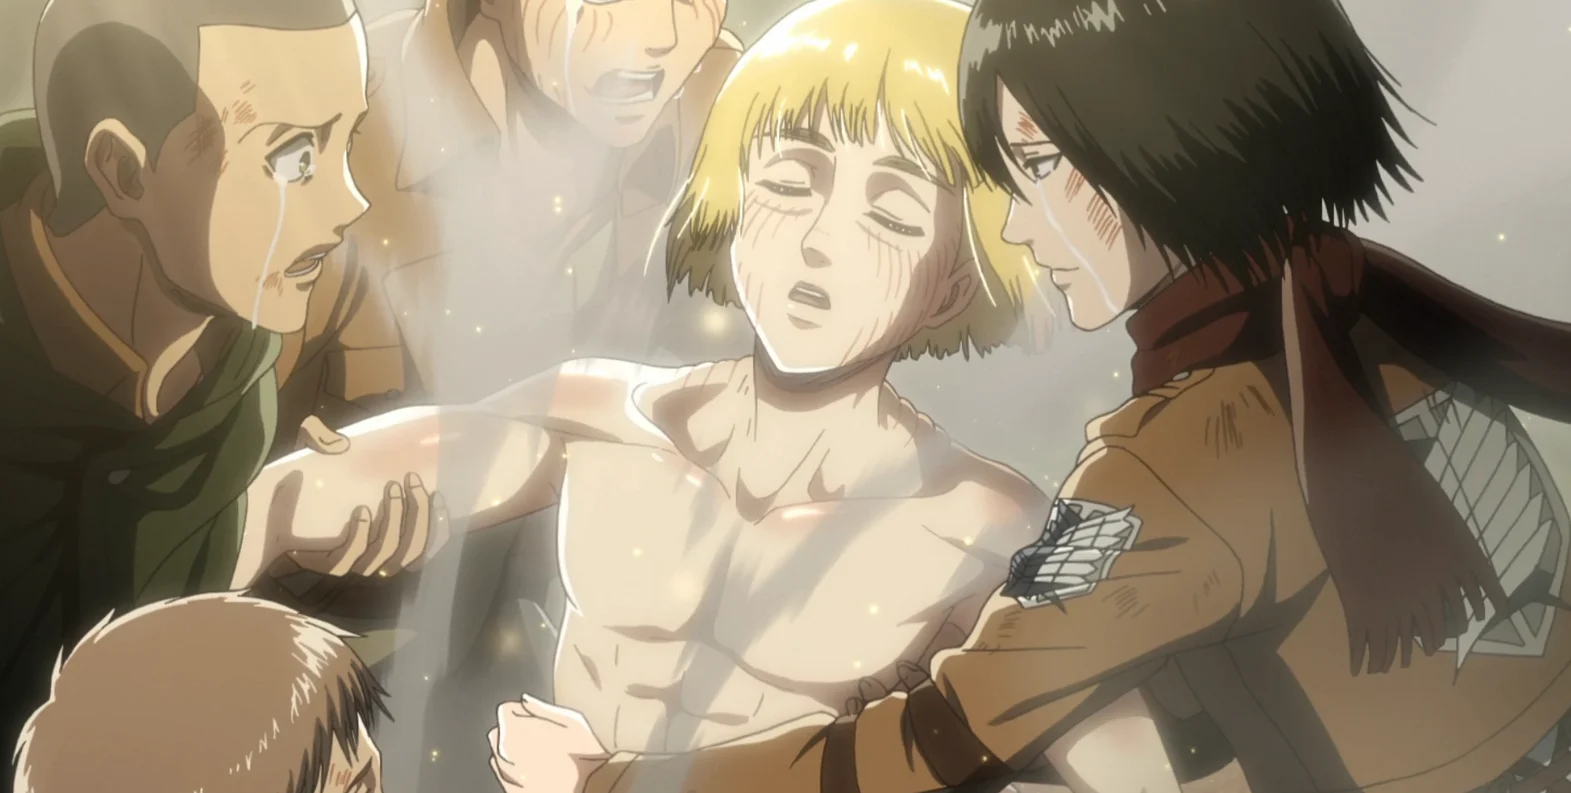 Armin's development was extremely shocking for AOT fans